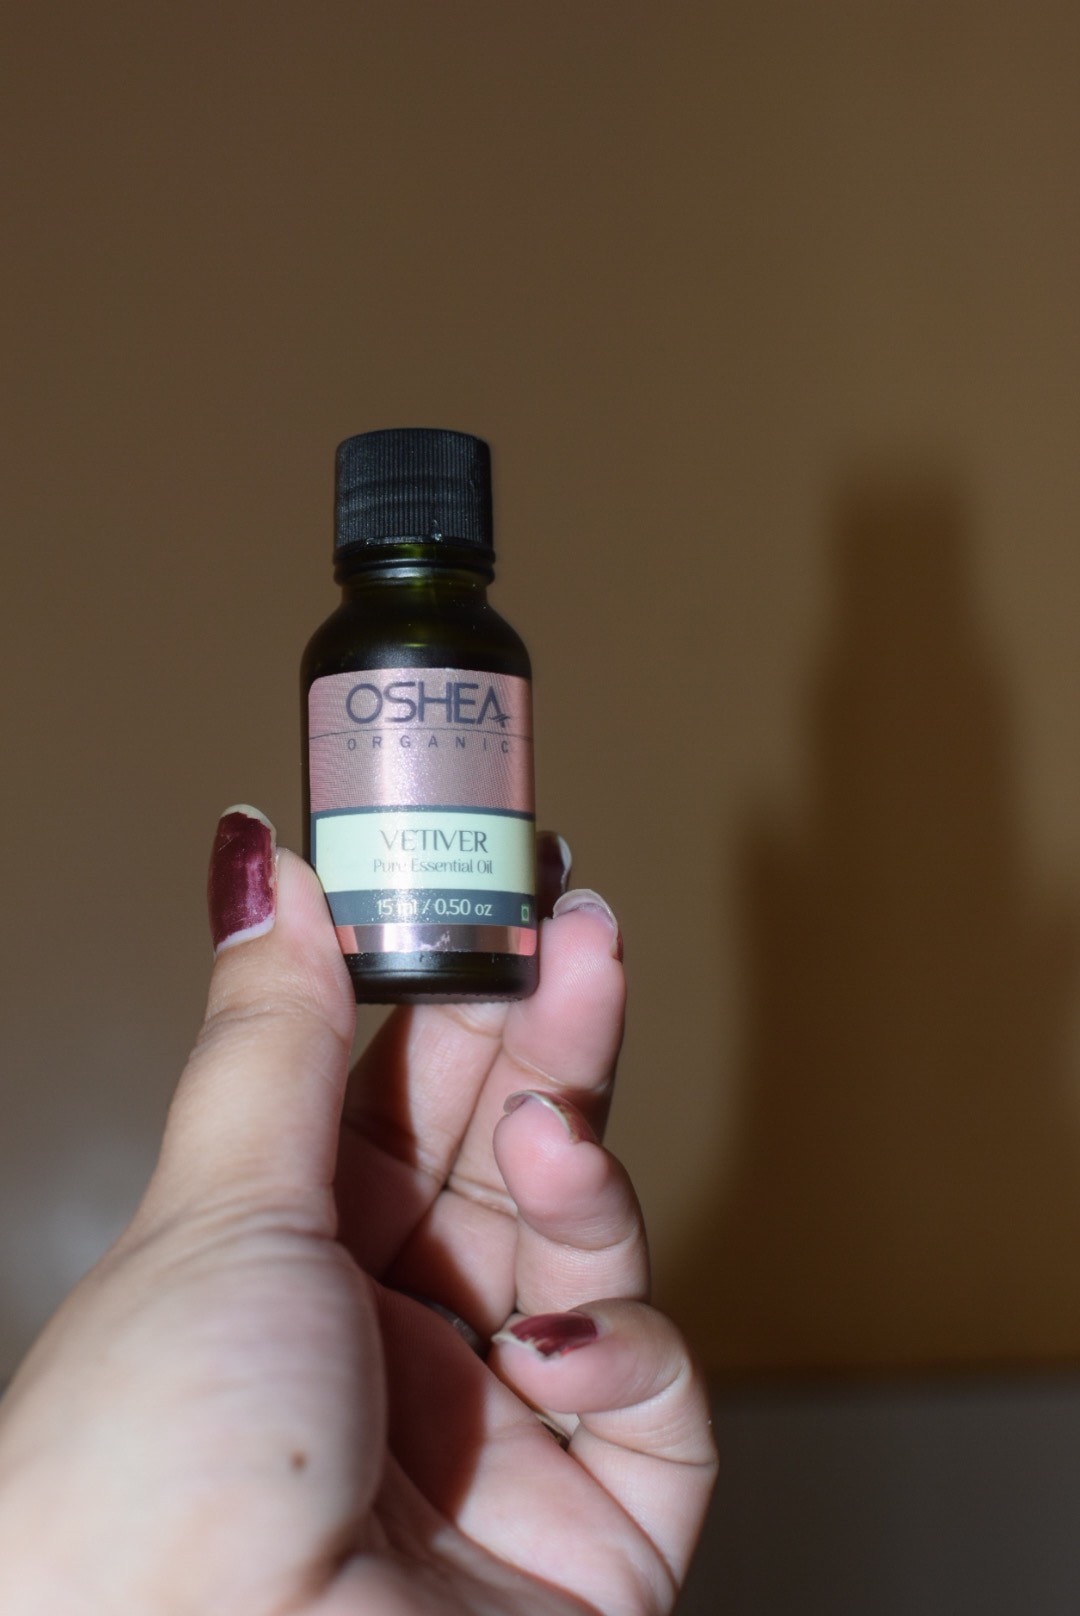 Oshea Herbals Pure Vetiver Essential Oil Review